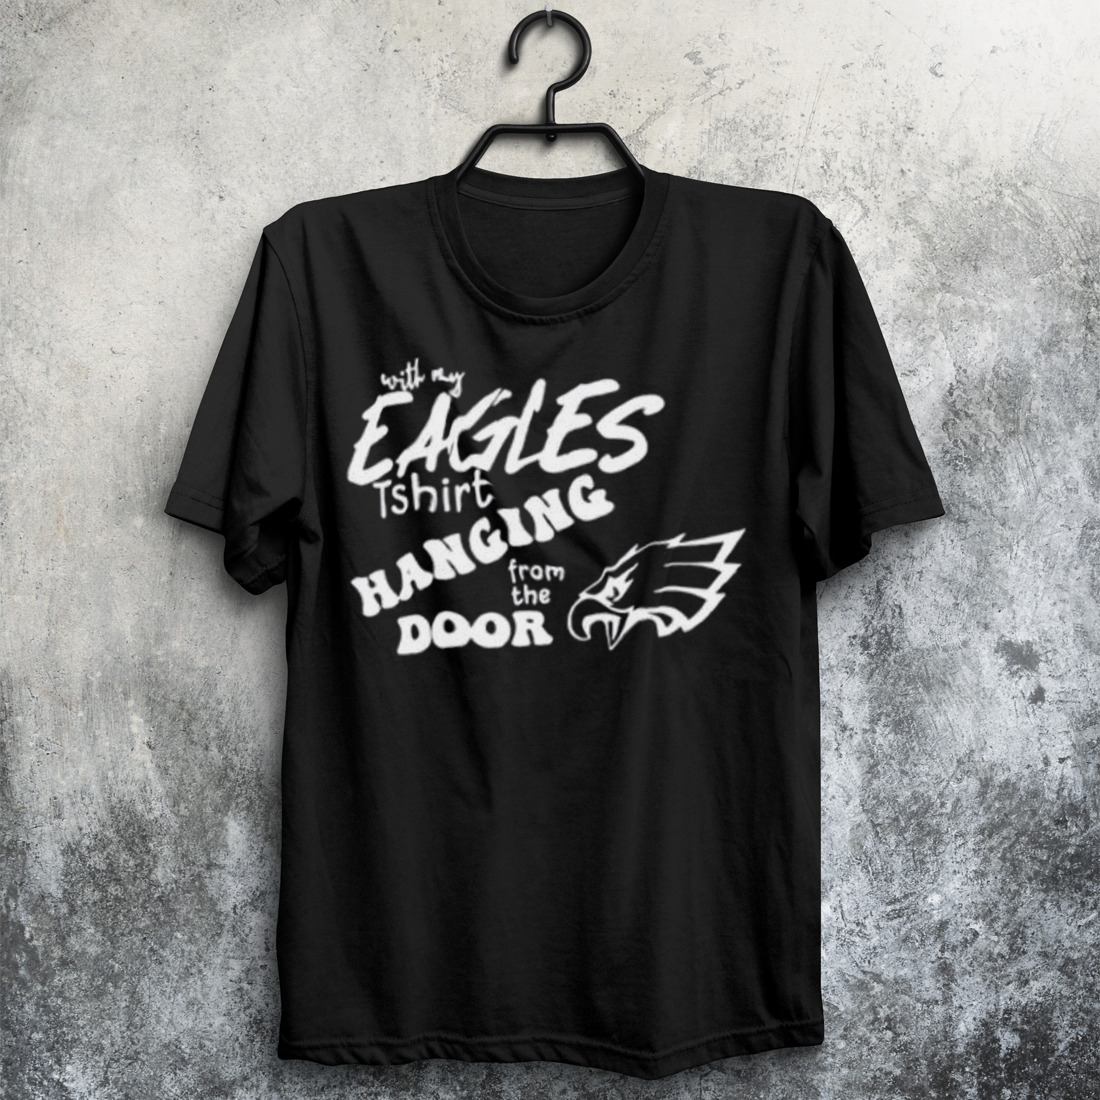 With my eagles tshirt hanging from the door shirt